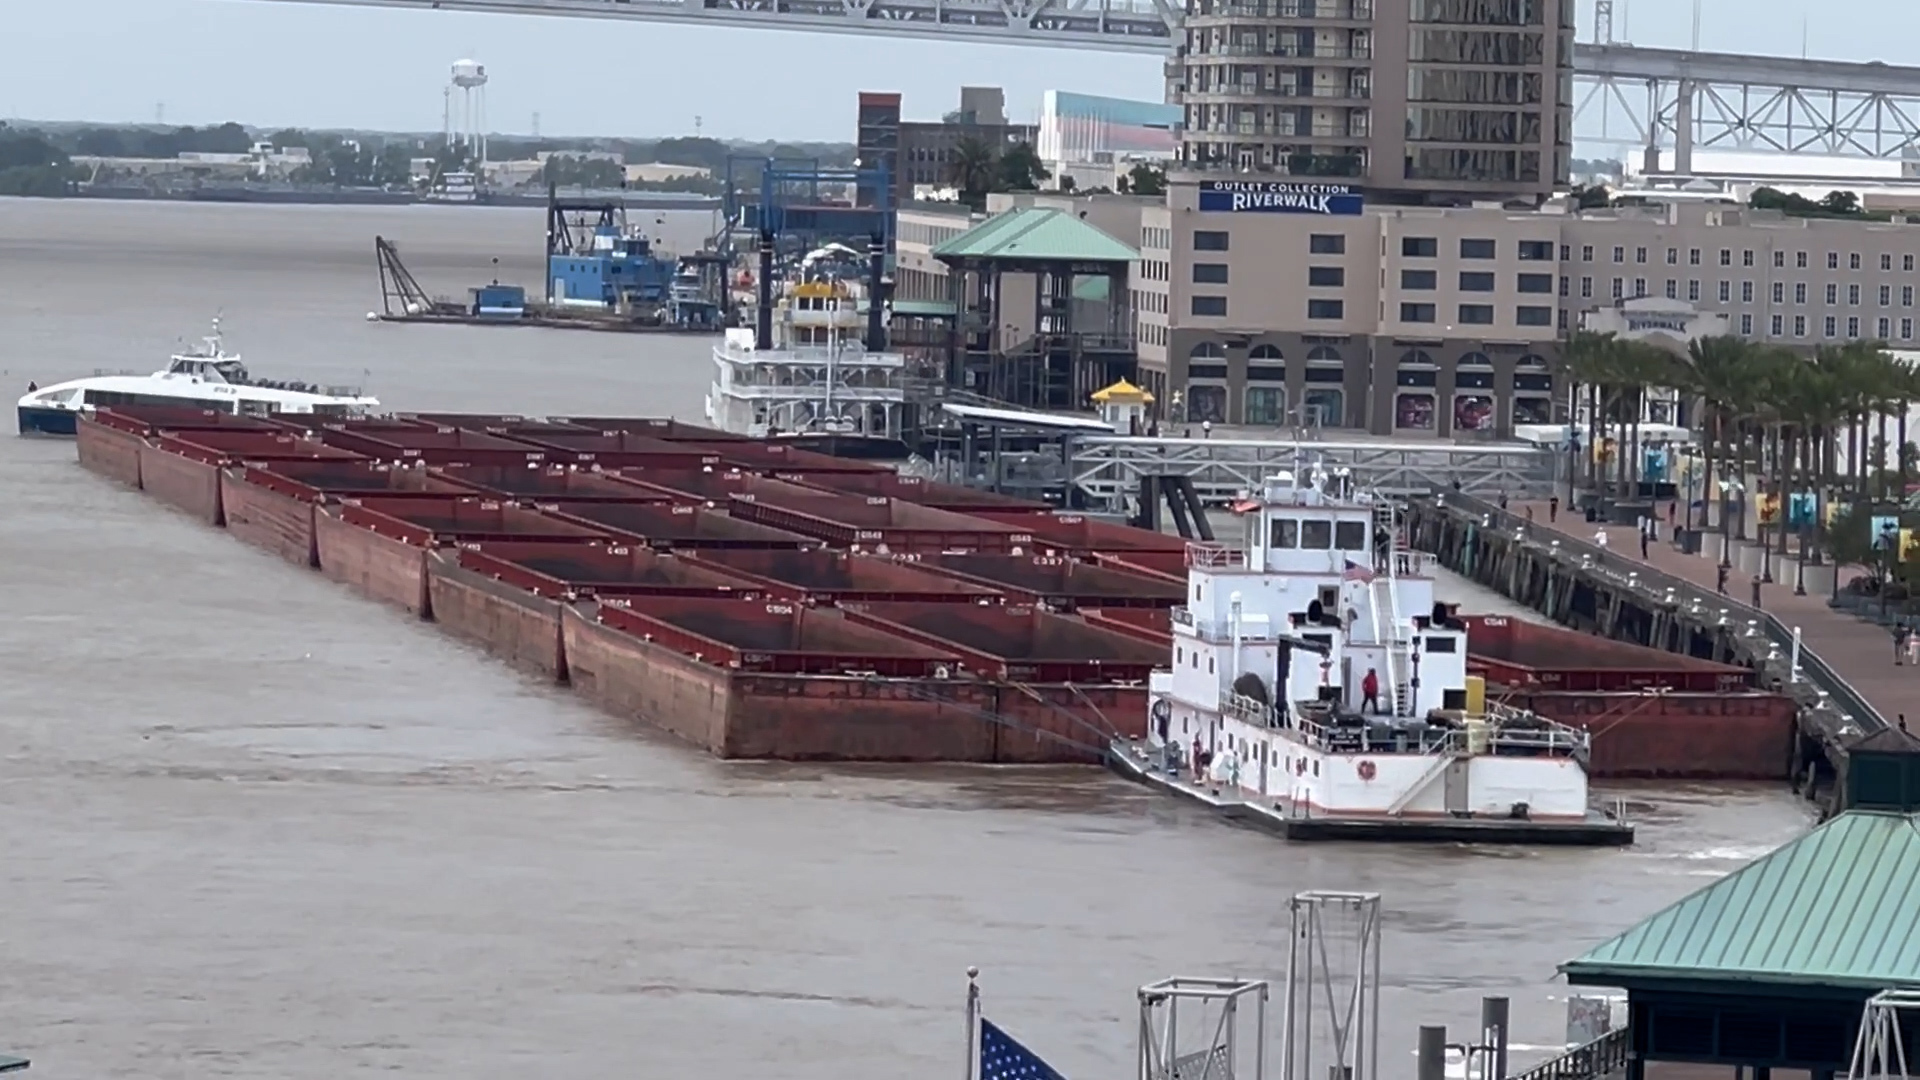 WWL Louisiana obtained video from Earl Weber of a tugboat trying to keep 24 barges from colliding with nearby boats and docks along Mississippi River in New Orleans.